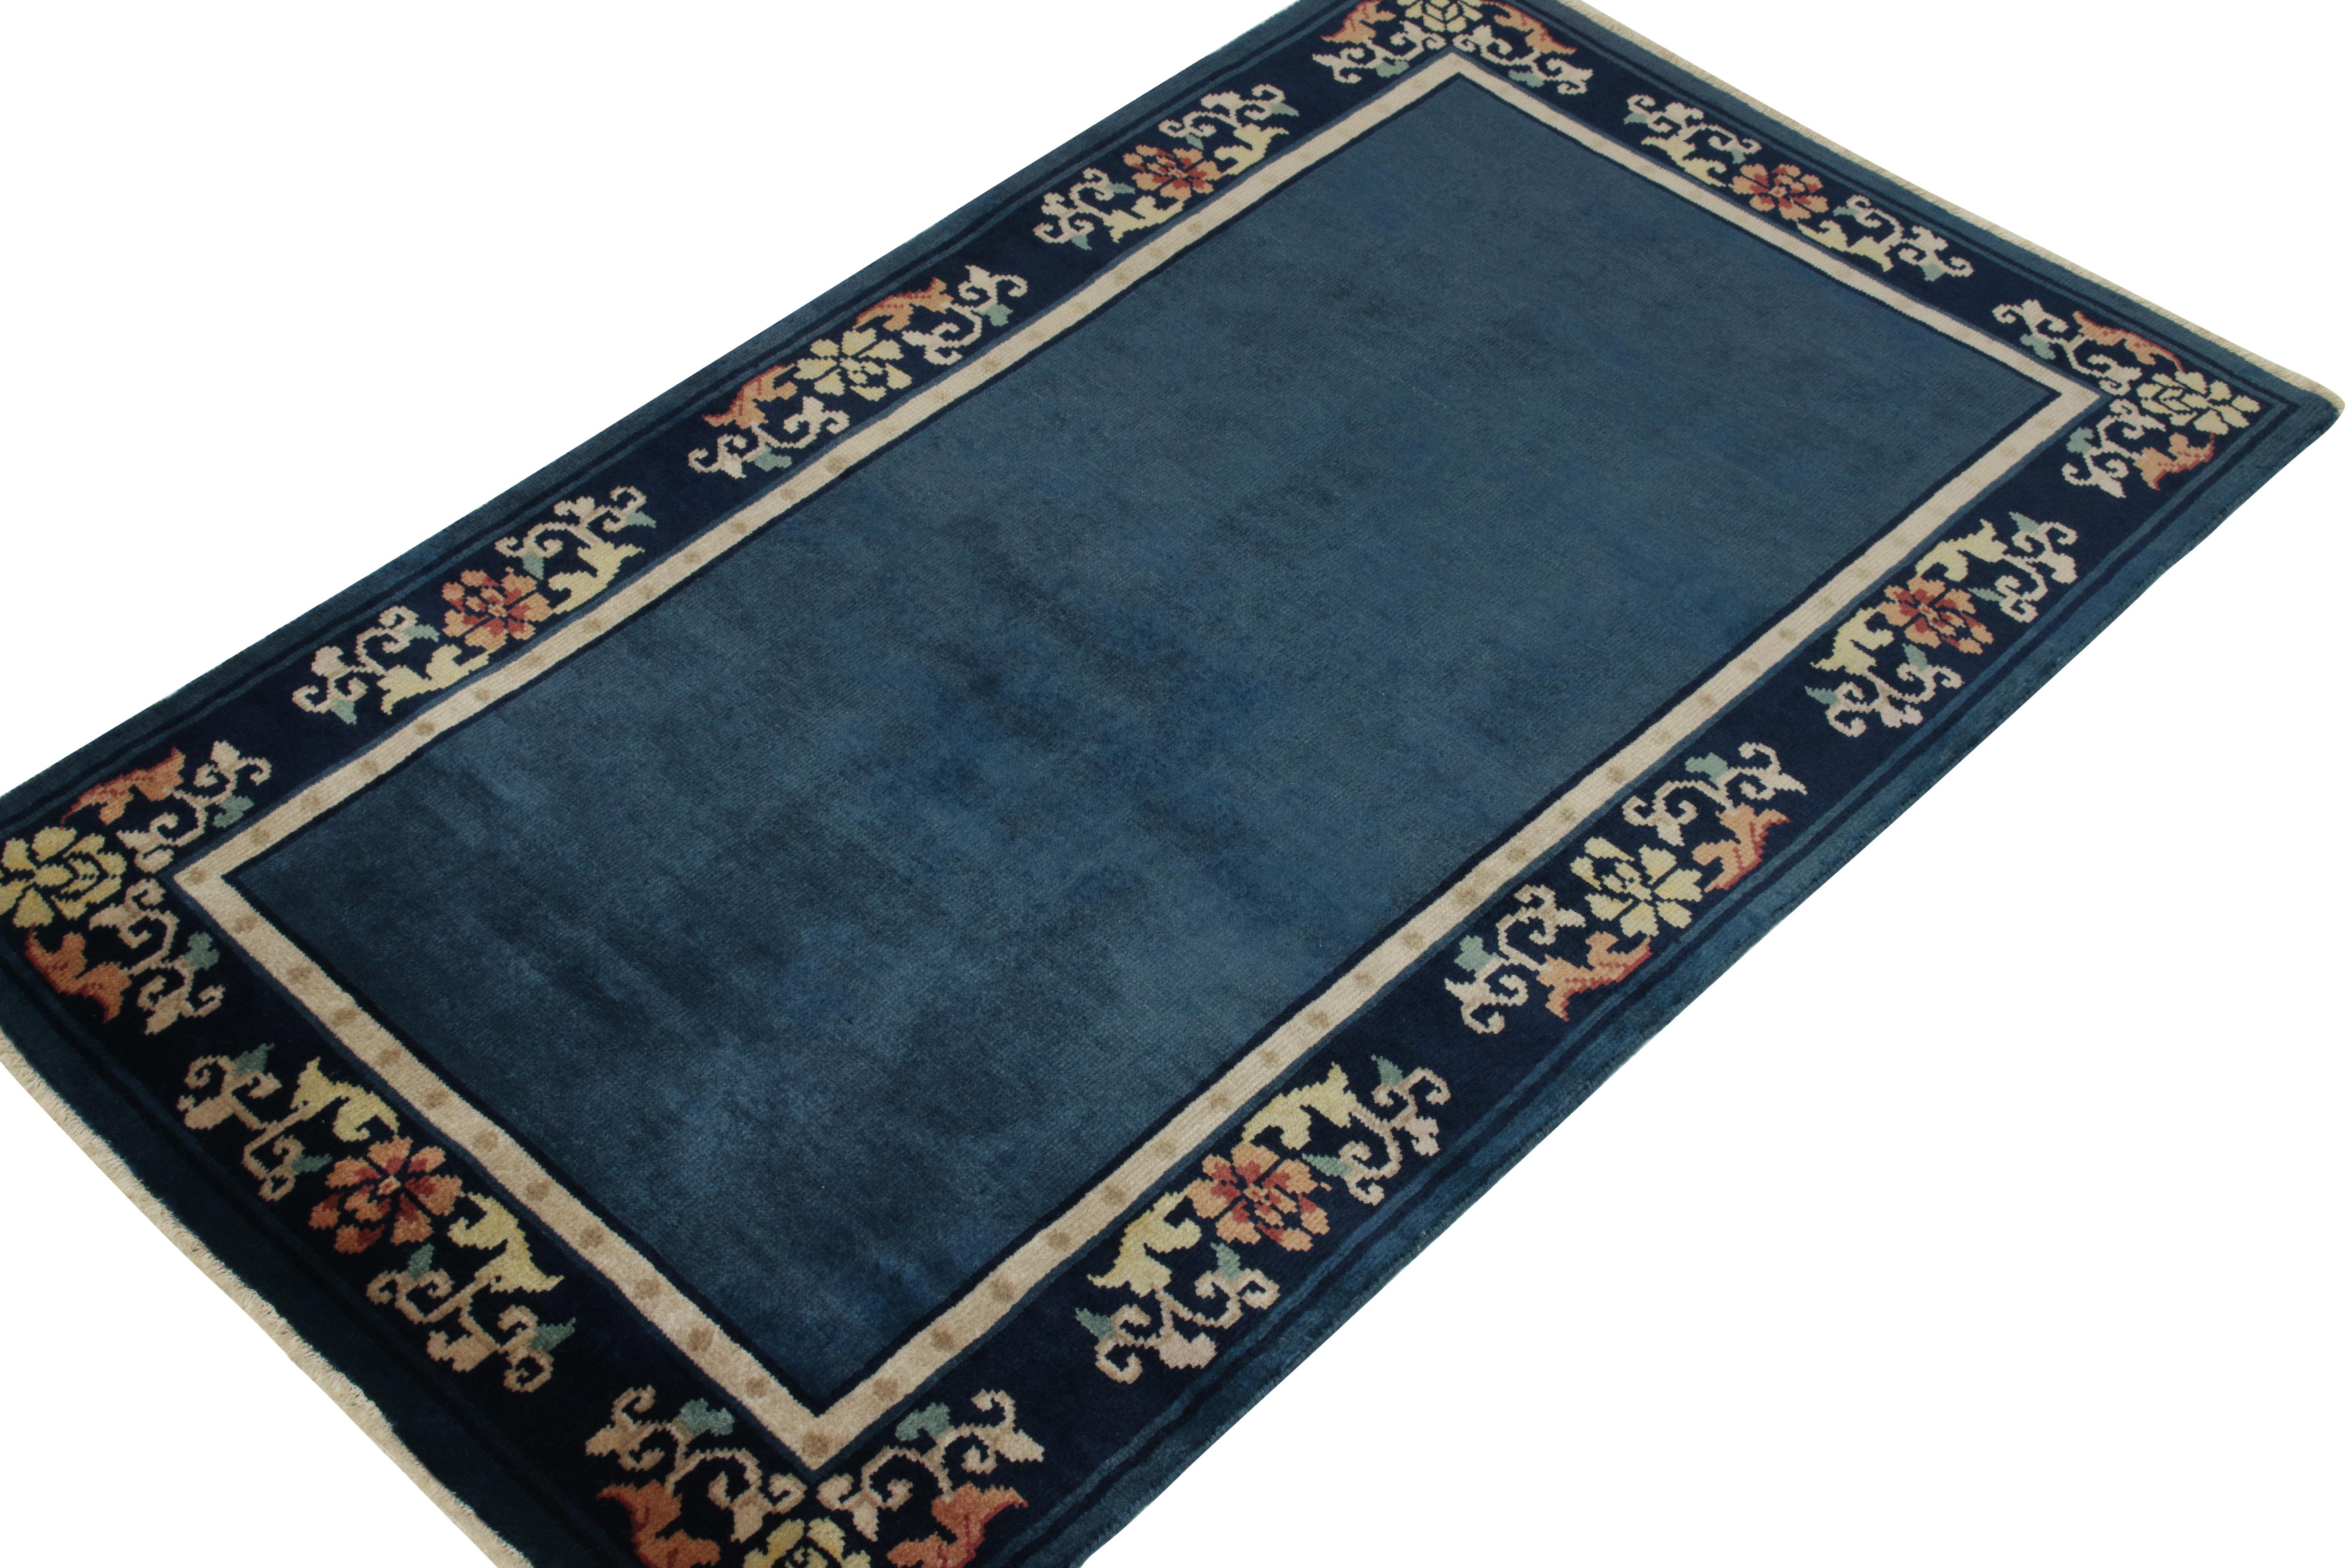 Art Deco Vintage Chinese Deco Style Rug in Deep Blue, with Floral Pattern by Rug & Kilim